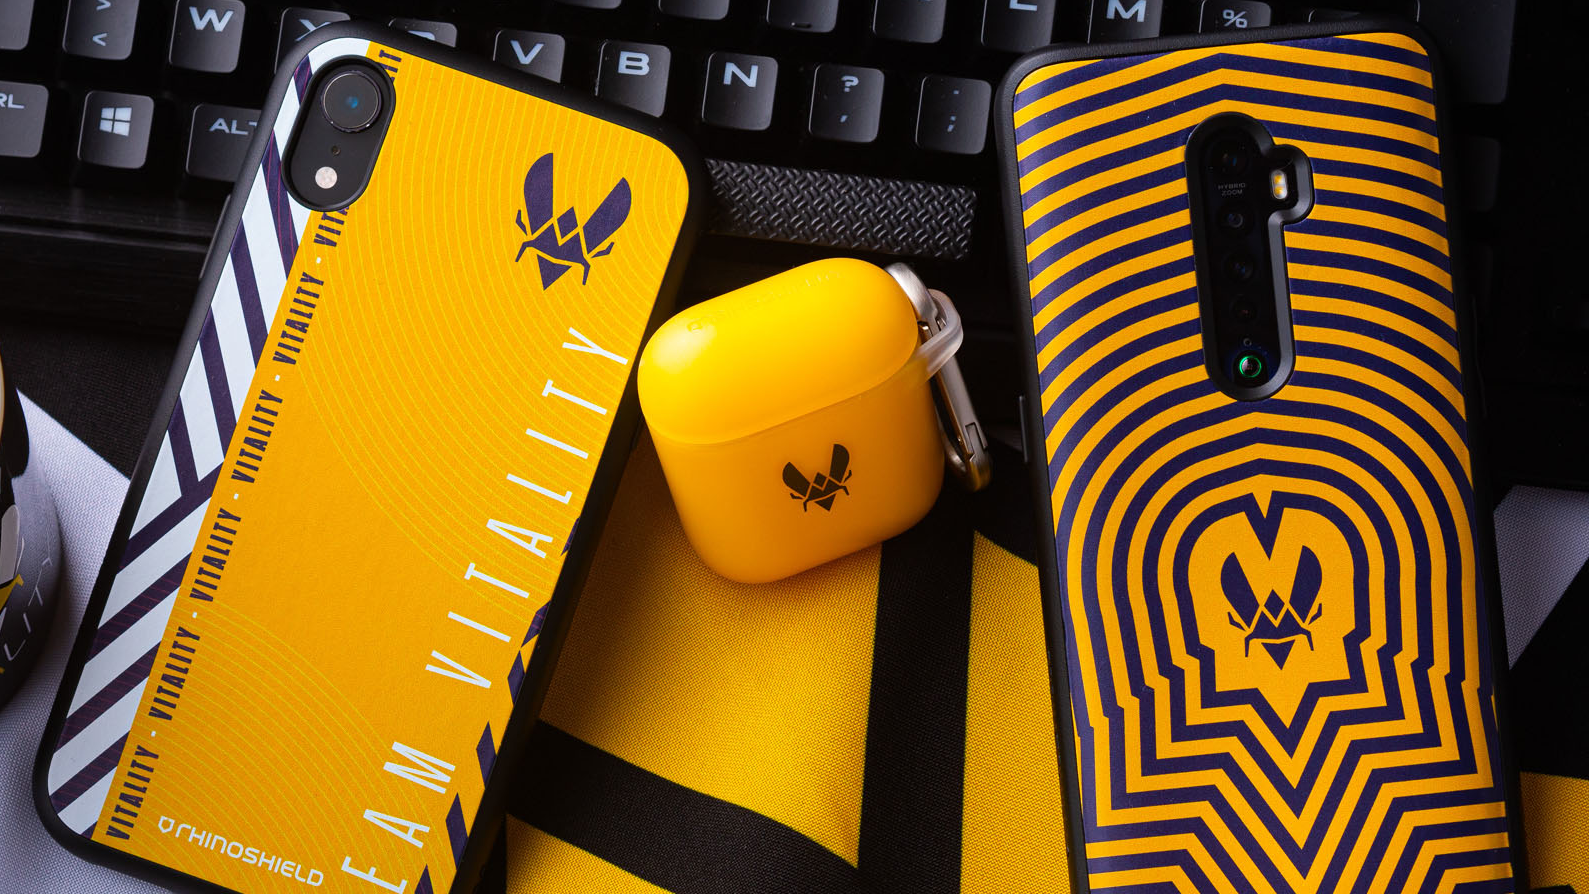 RhinoShield to produce Team Vitality phone and gadget cases